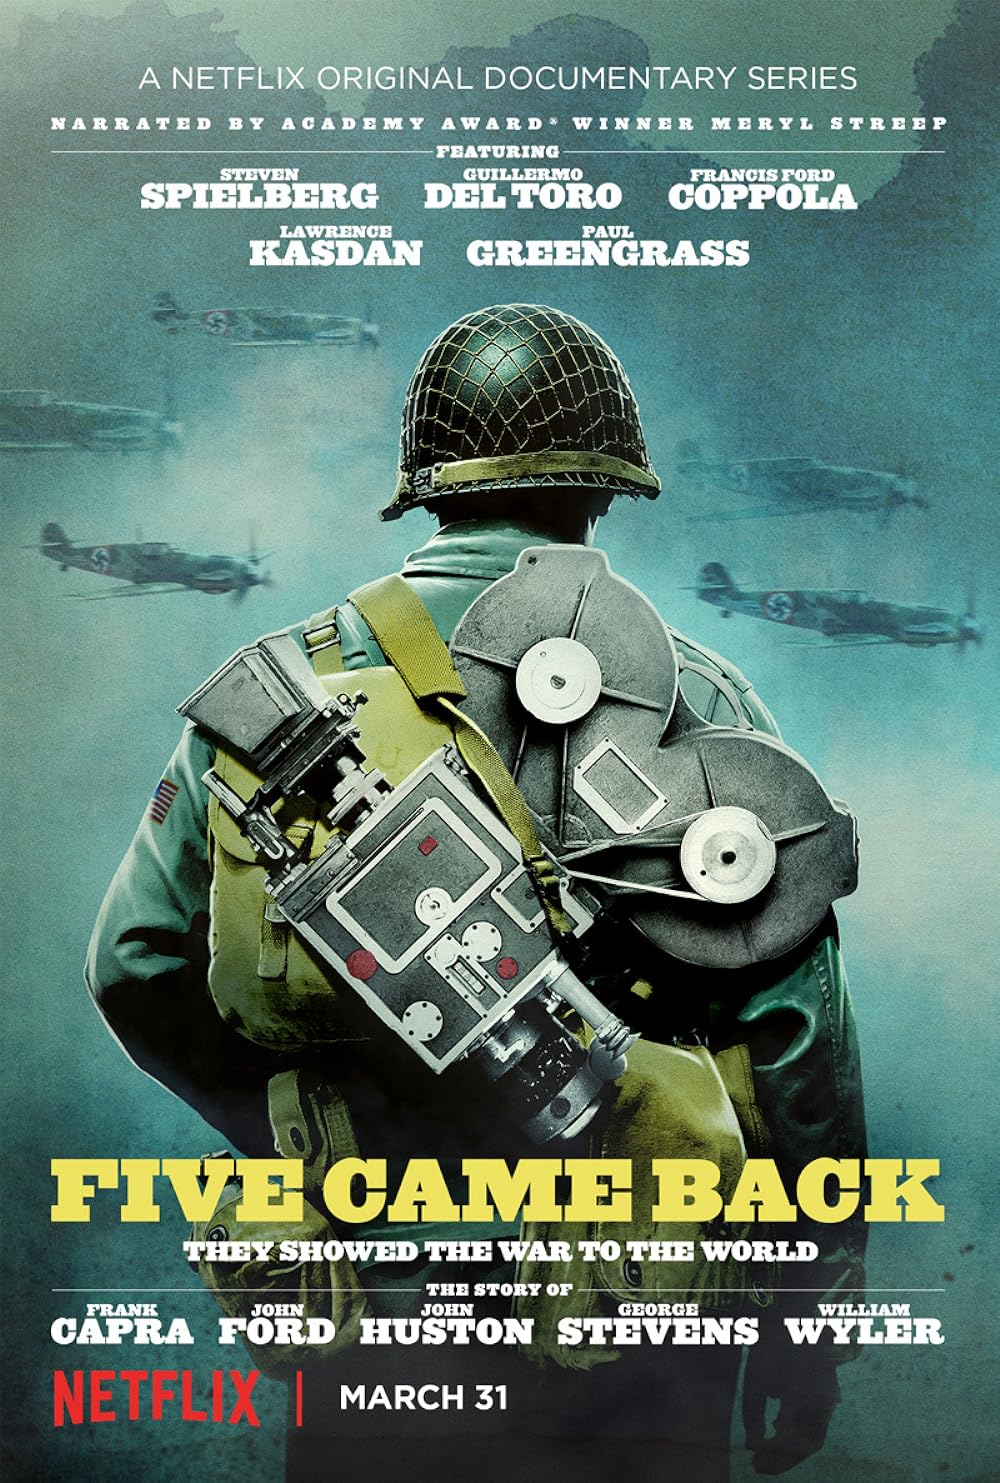 Five Came Back (2017) S1 EP3 The Price of Victory 448Kbps 23.976Fps 48Khz 5.1Ch DD+ NF E-AC3 Turkish Audio TAC